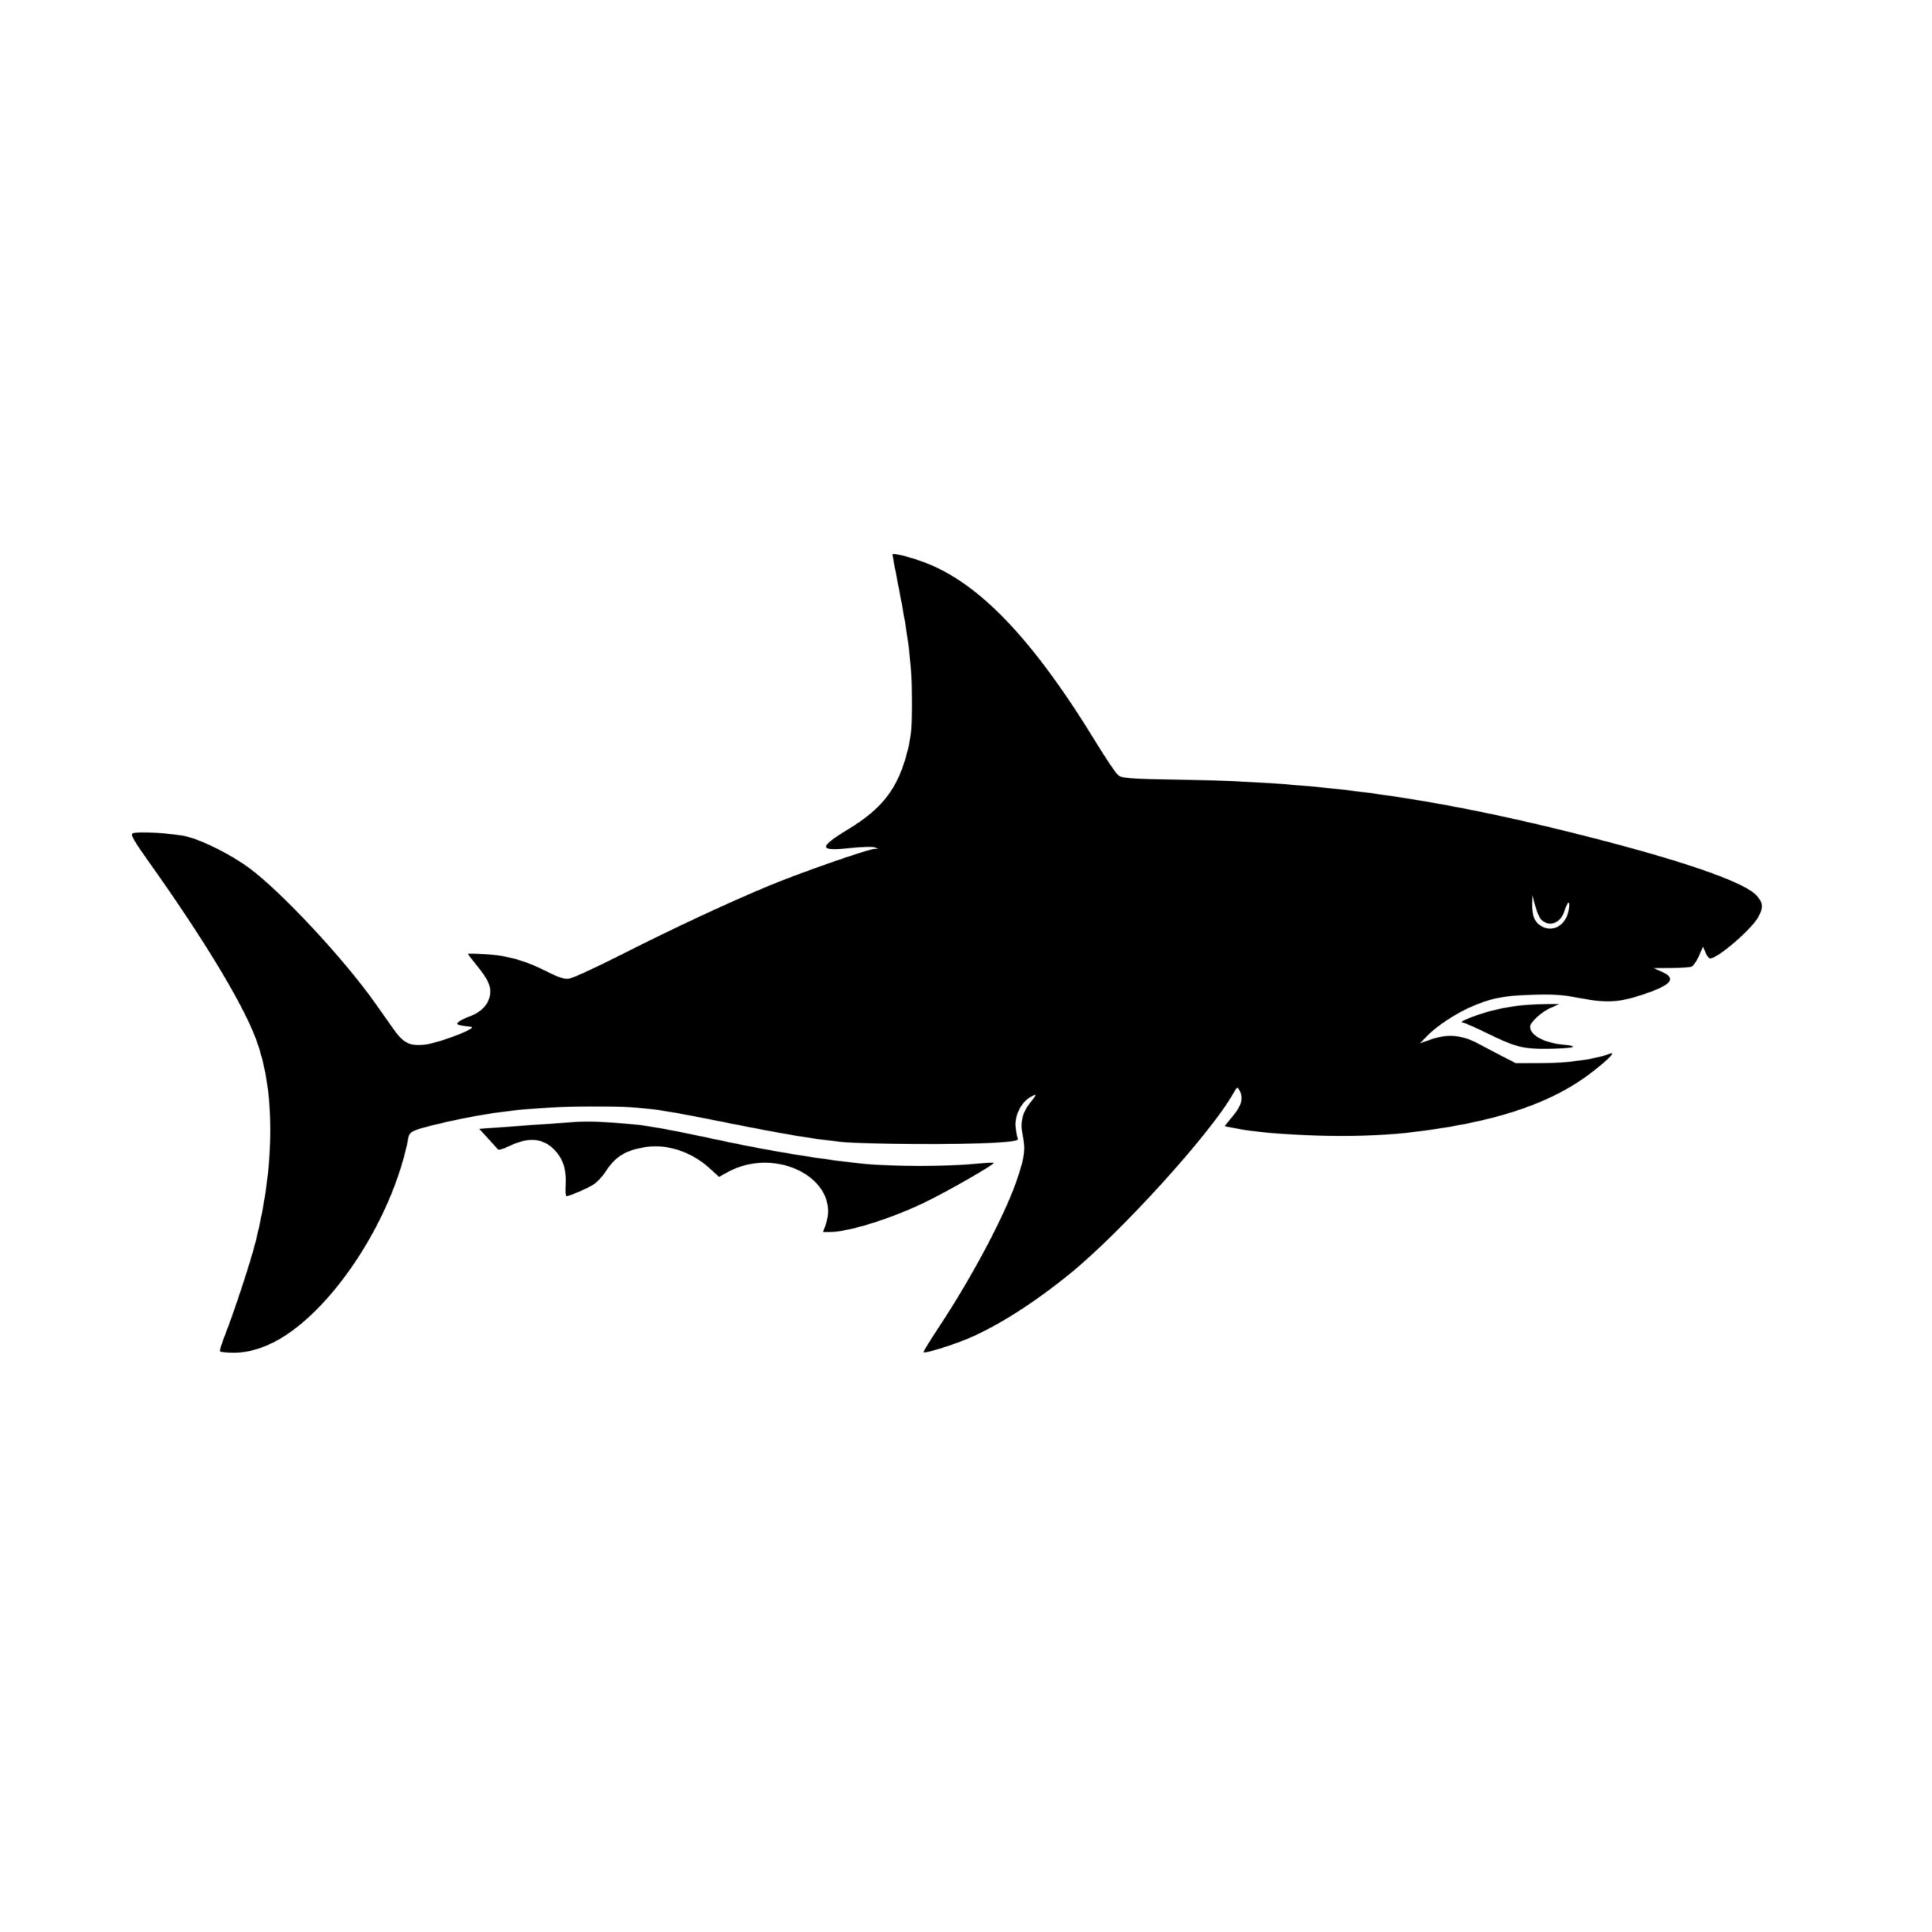 Deep-sea Shark SVG File for Cricut, Silhouette, and Laser Machines